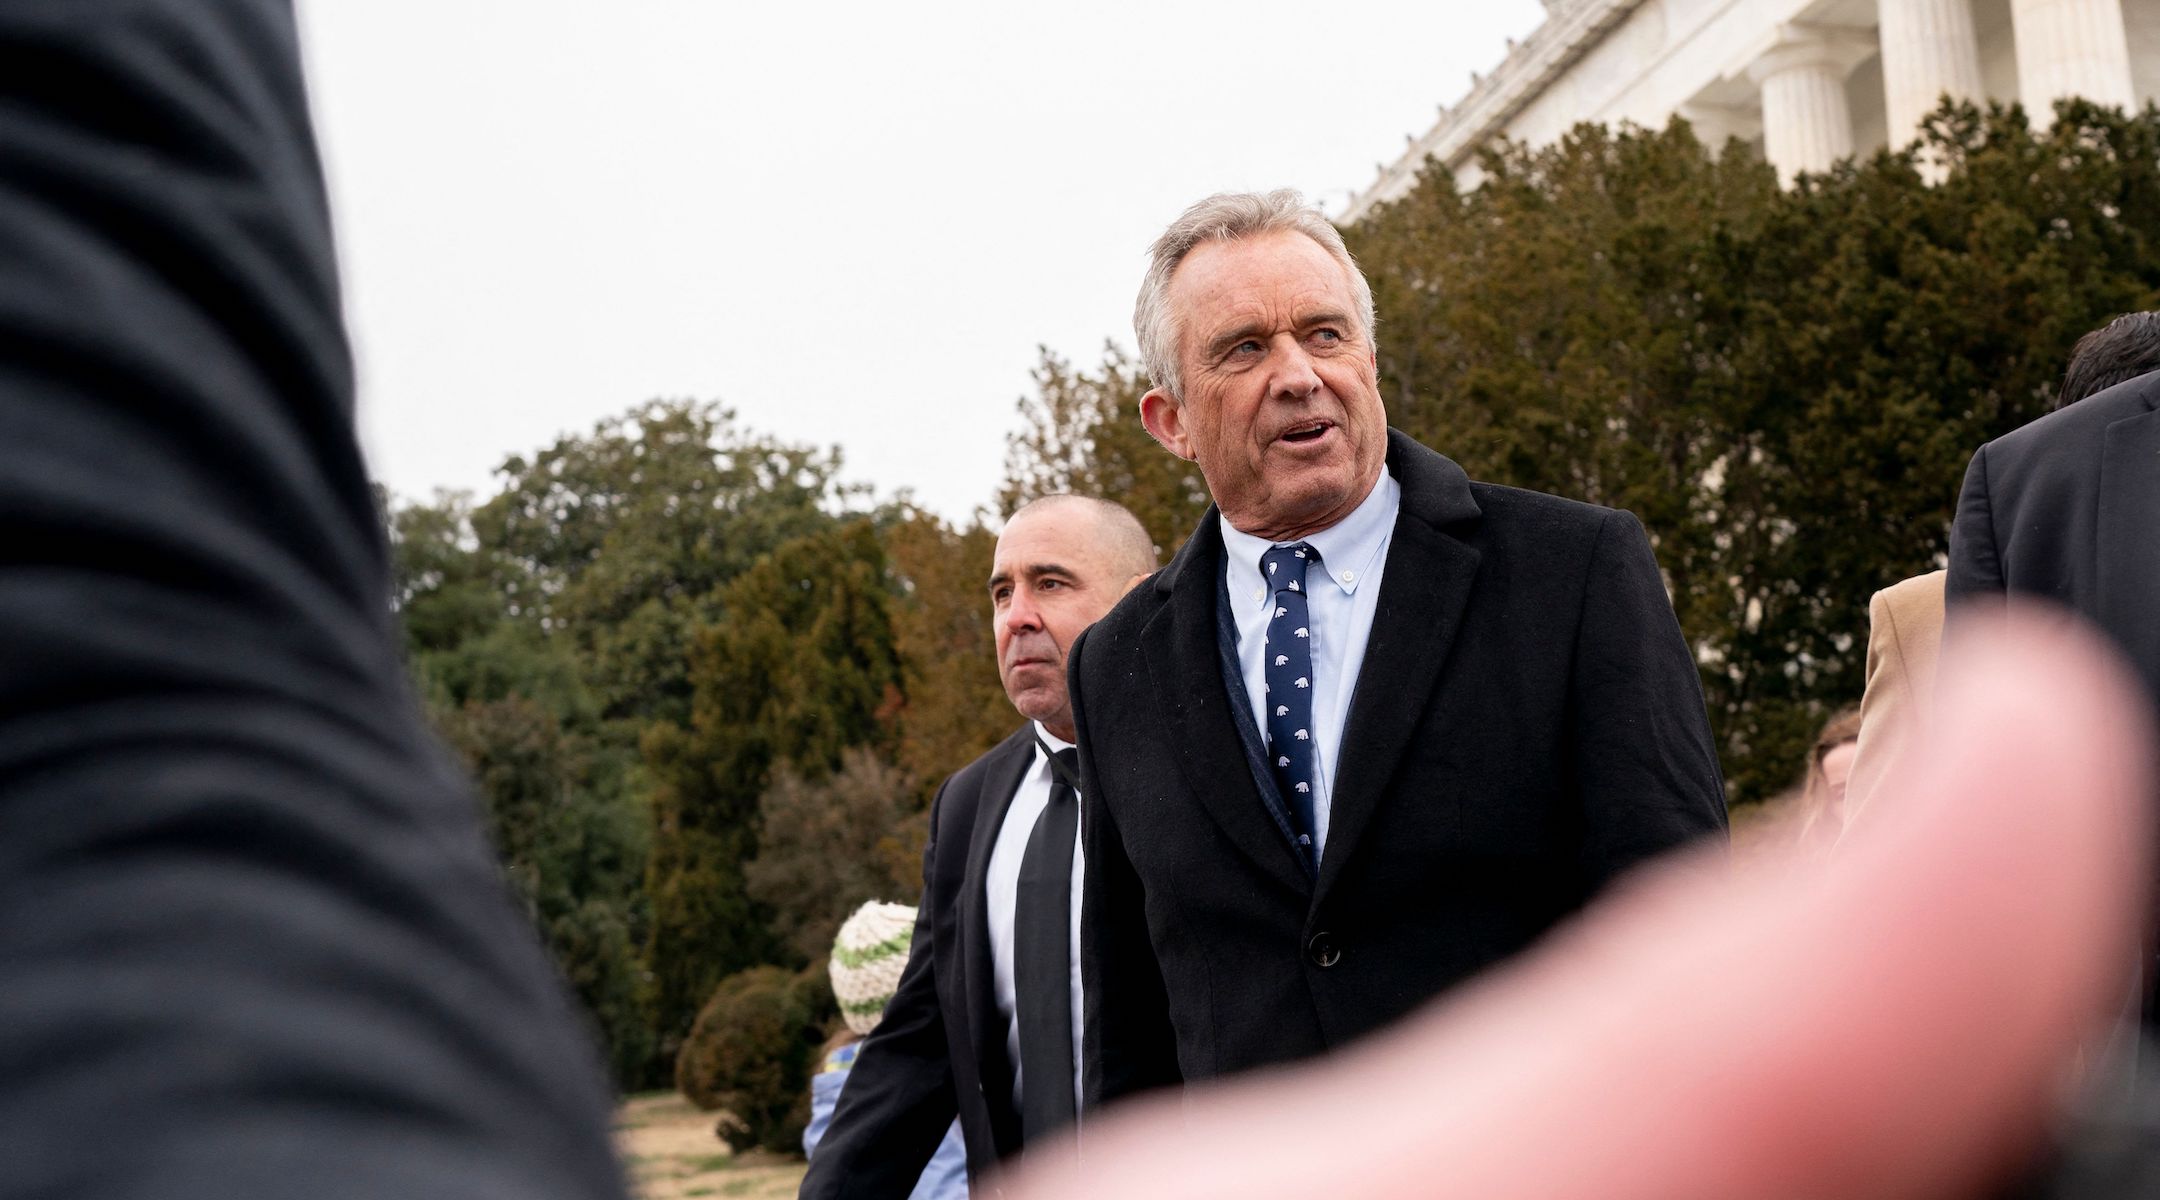 Robert F. Kennedy Jr. departs after speaking at the Lincoln Memorial to a rally against vaccine mandates in Washington, D.C., Jan. 23, 2022. (Stefani Reynolds/AFP via Getty Images)